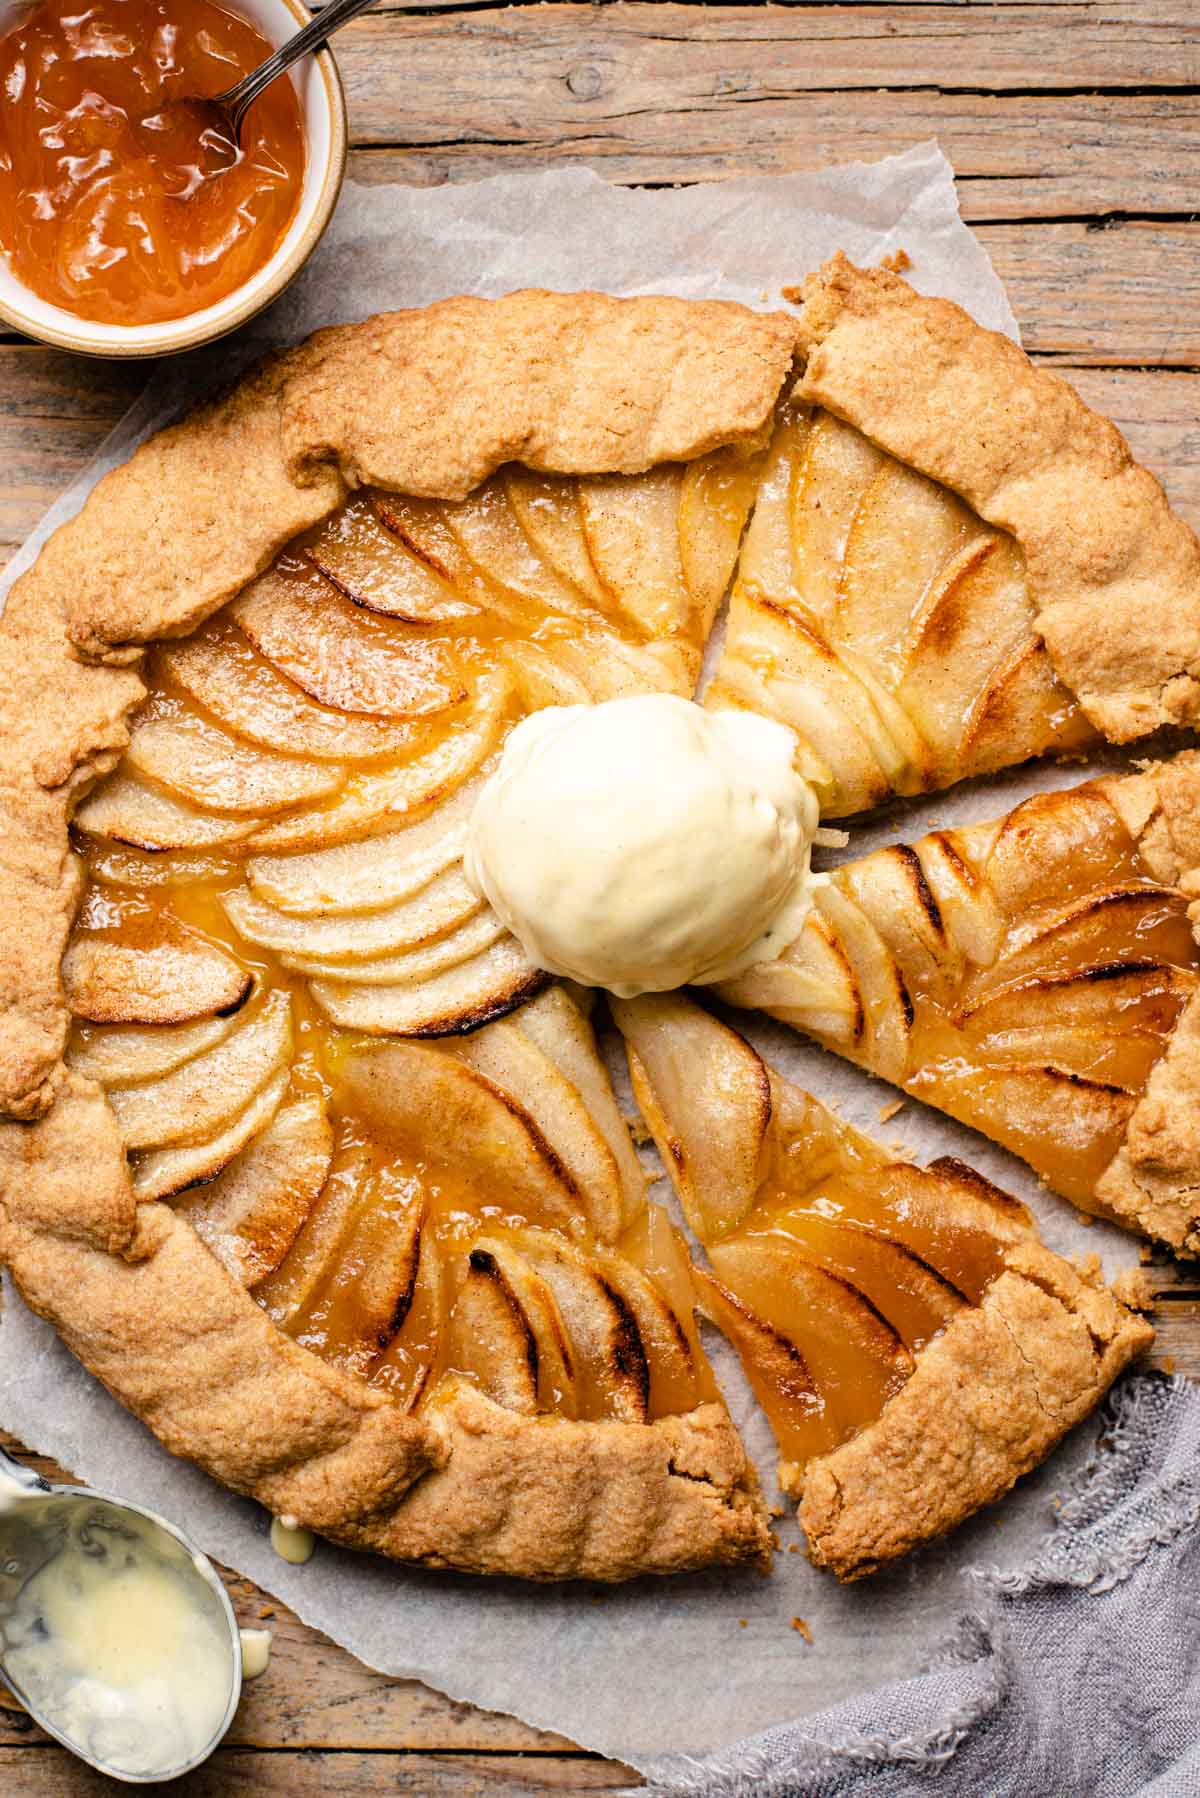 An overhead shot of an apple crostata with some slices cut and a scoop of ice cream on top